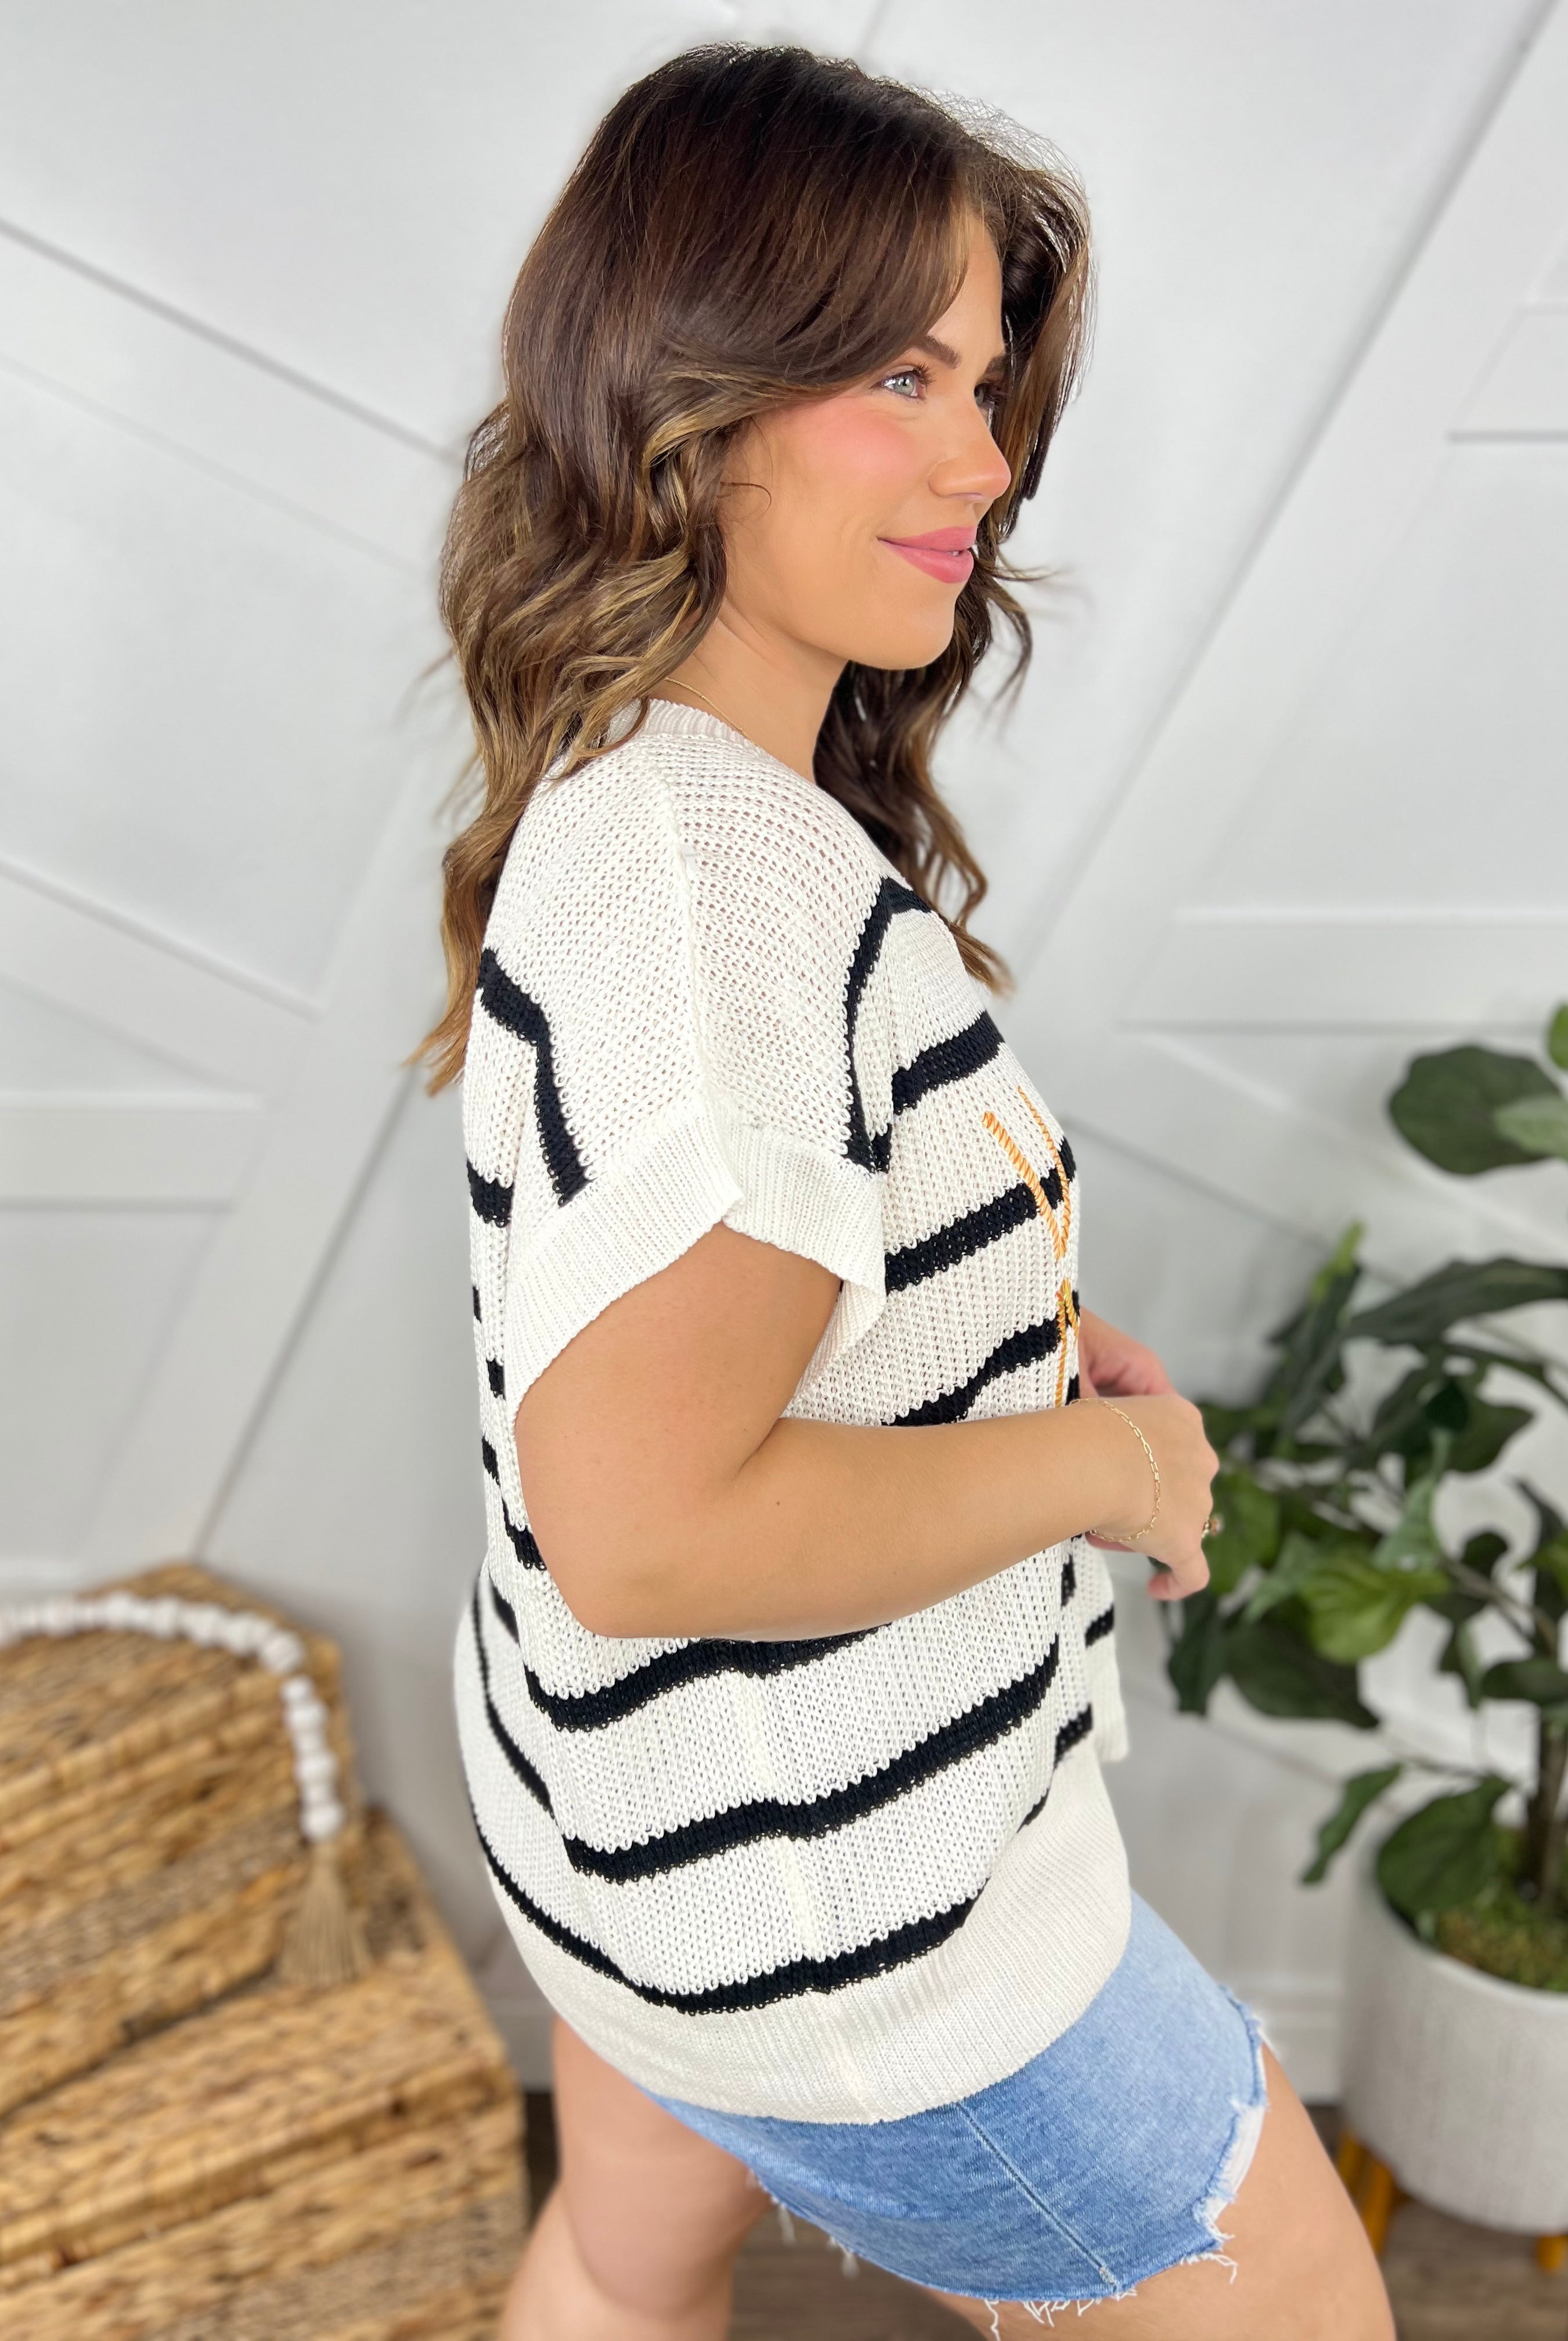 Vacay Mode Sweater Top-110 Short Sleeve Top-Bibi-Heathered Boho Boutique, Women's Fashion and Accessories in Palmetto, FL